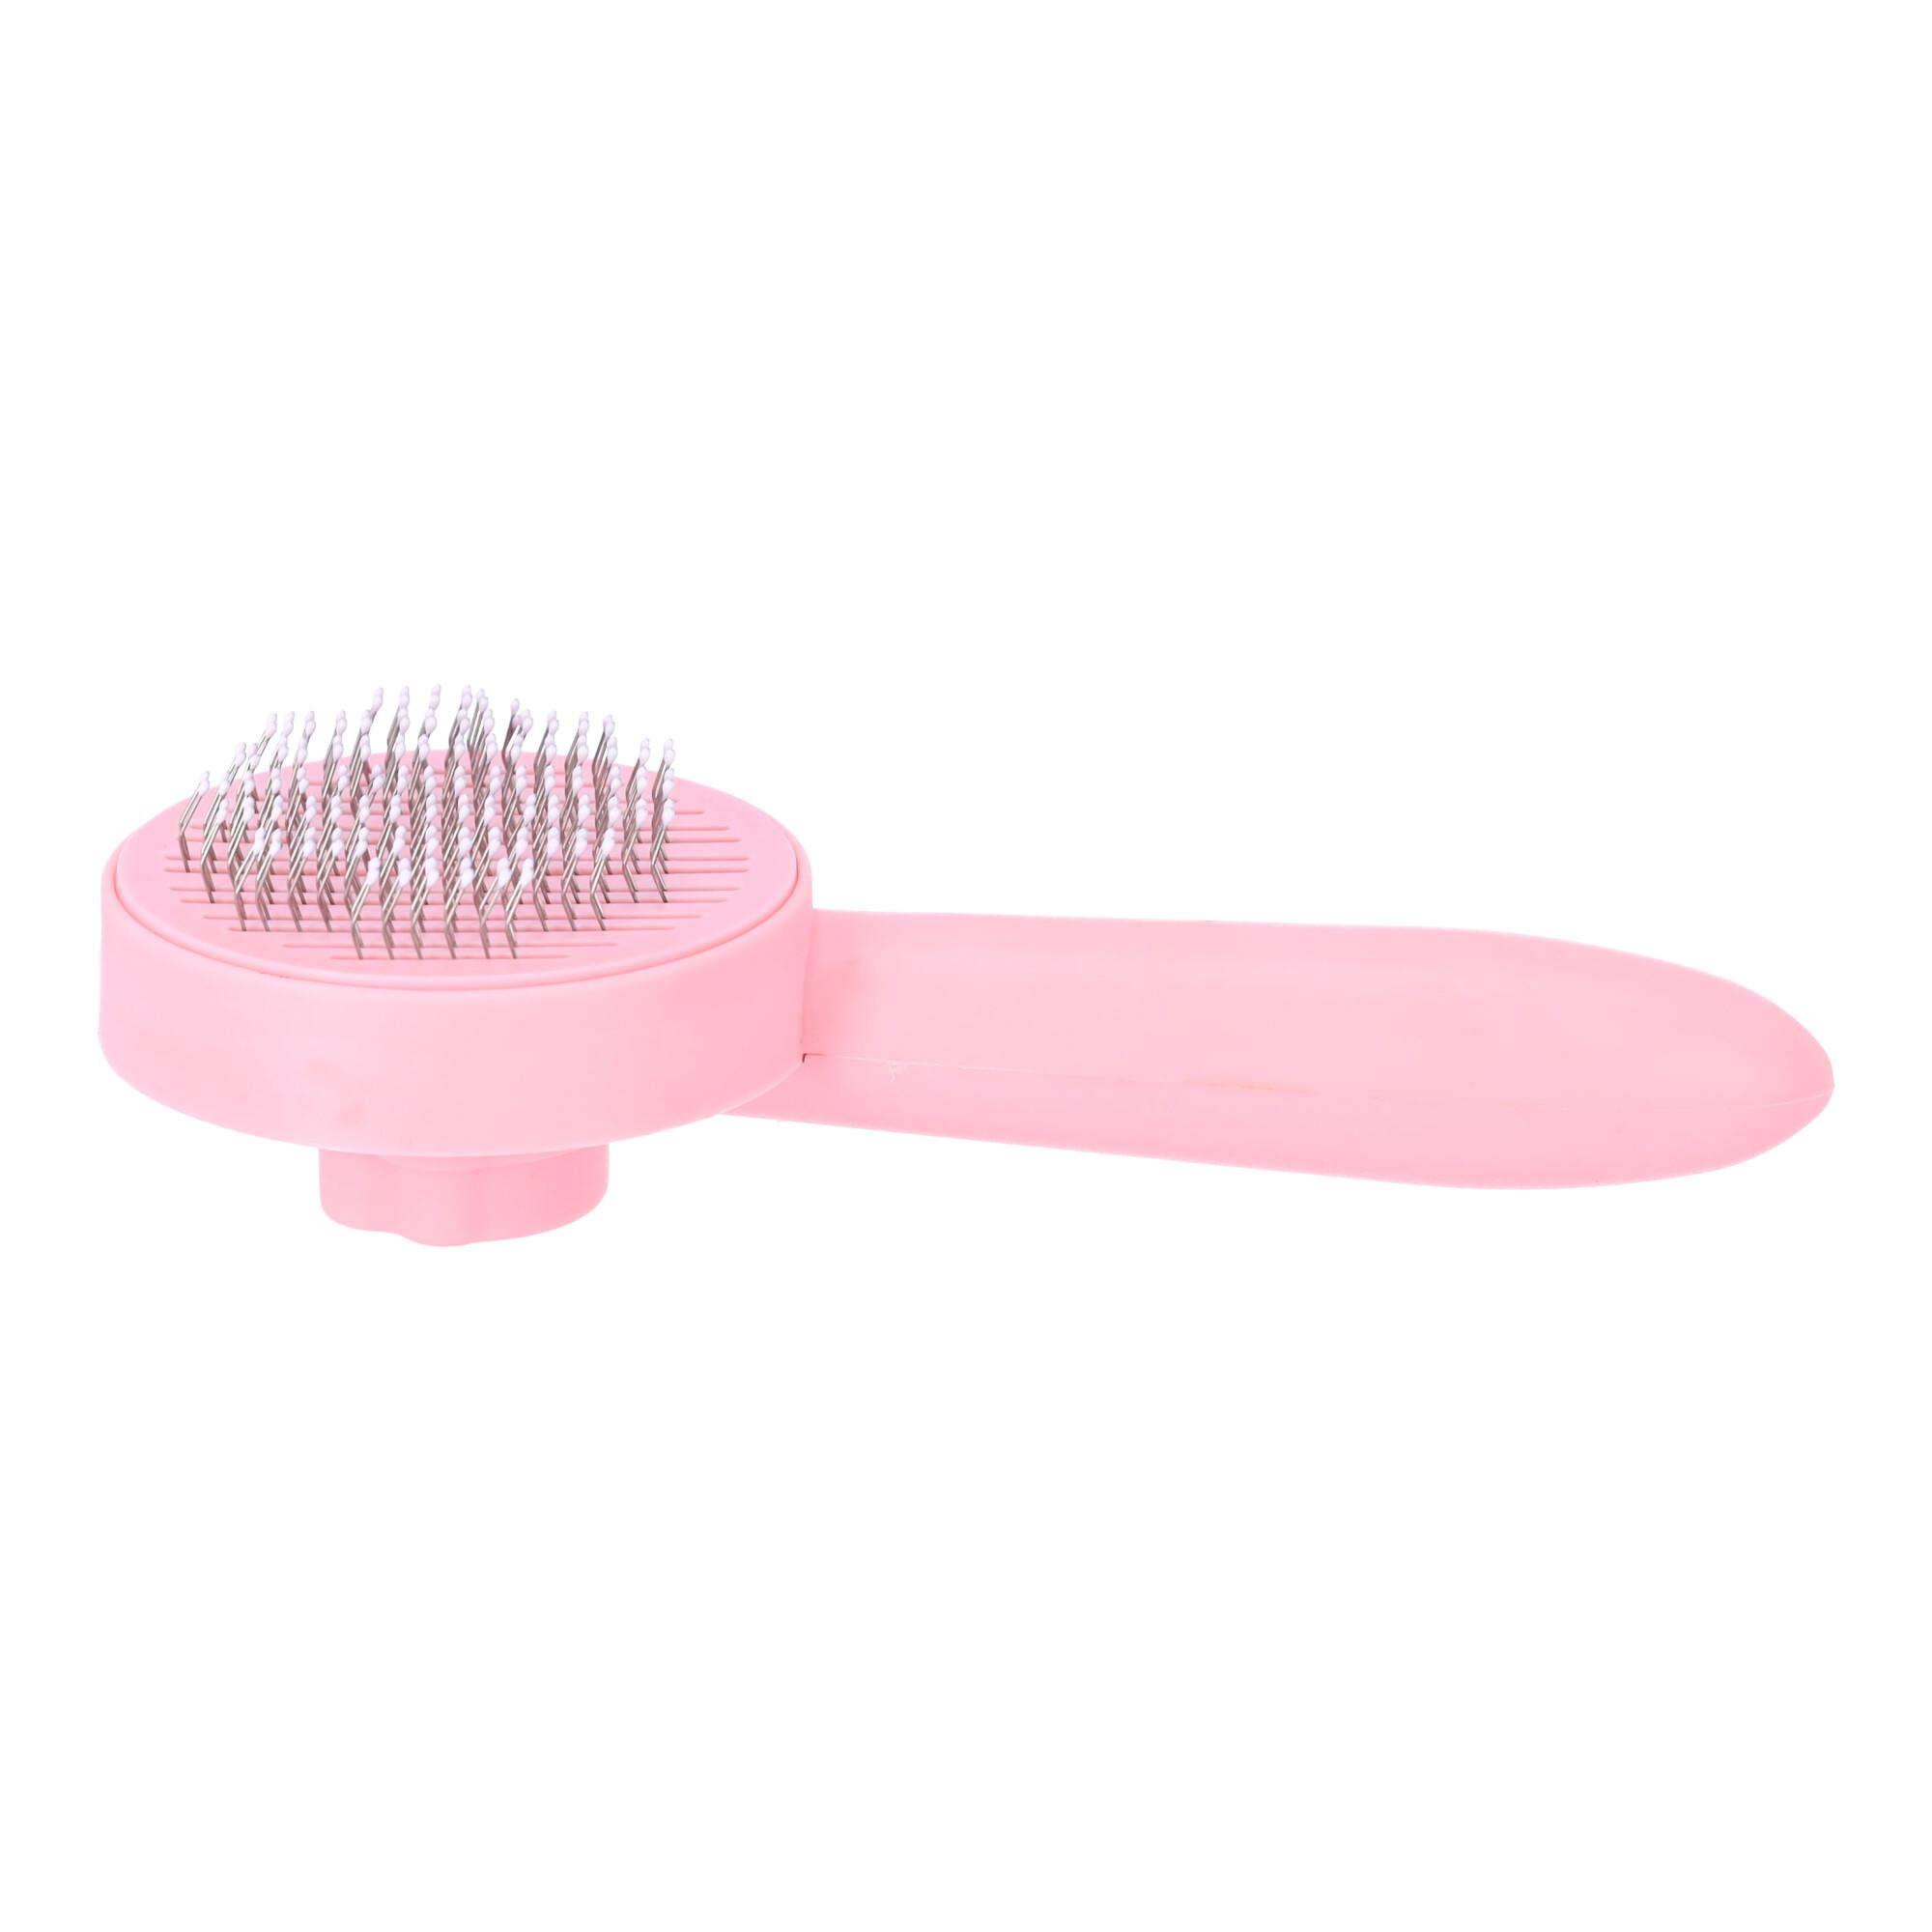 Brush for hair removal dog or cat - pink